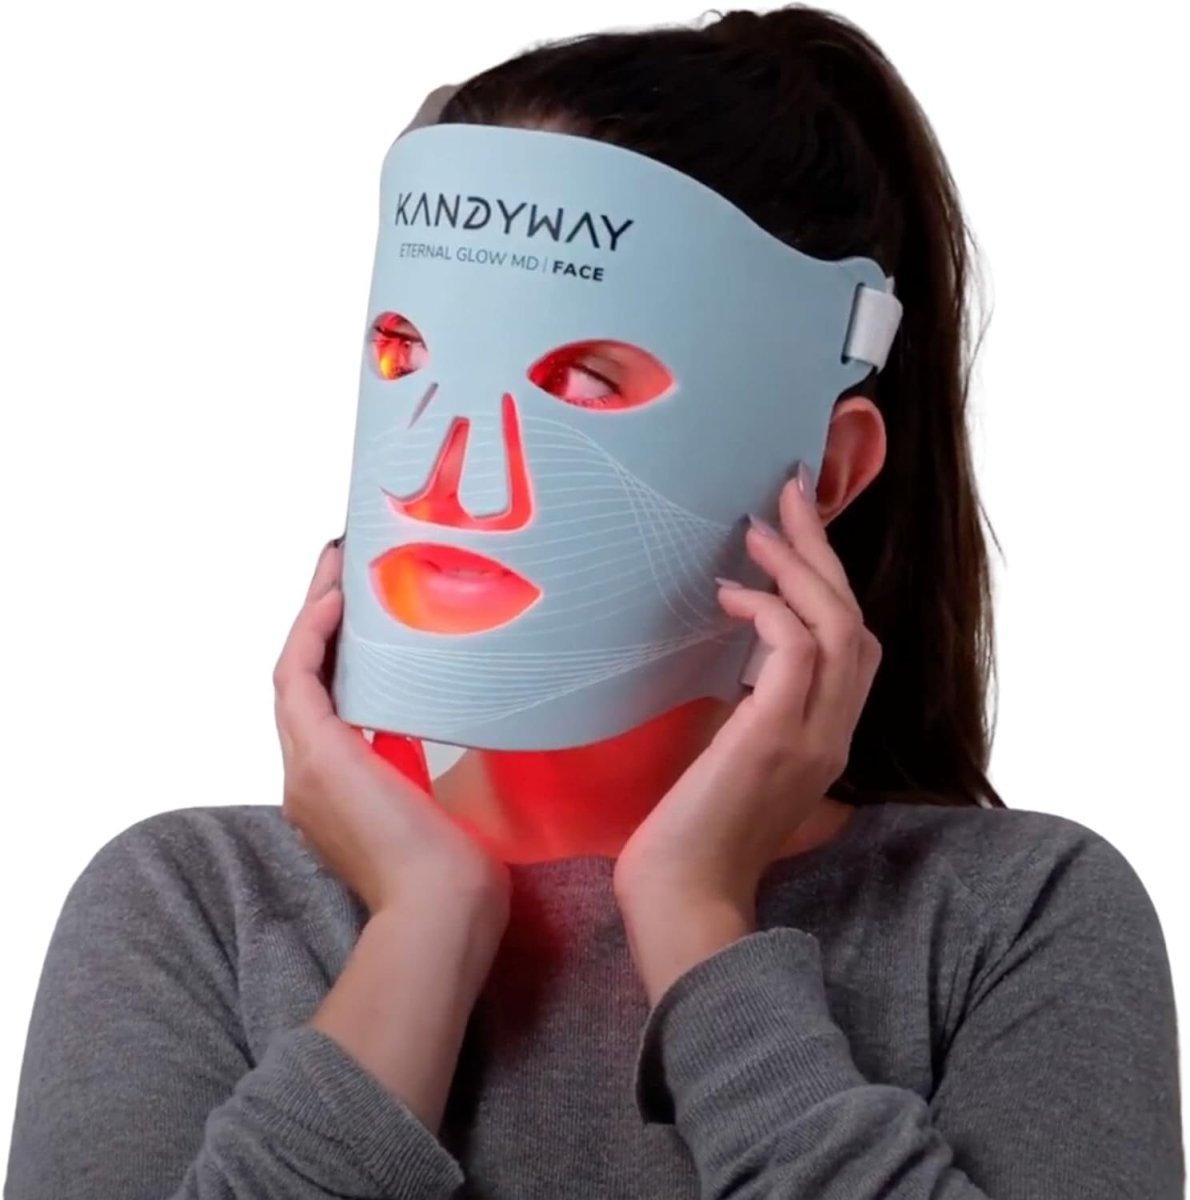 Kandyway Eternal Glow MD - Red Light Therapy Mask - Kandyway